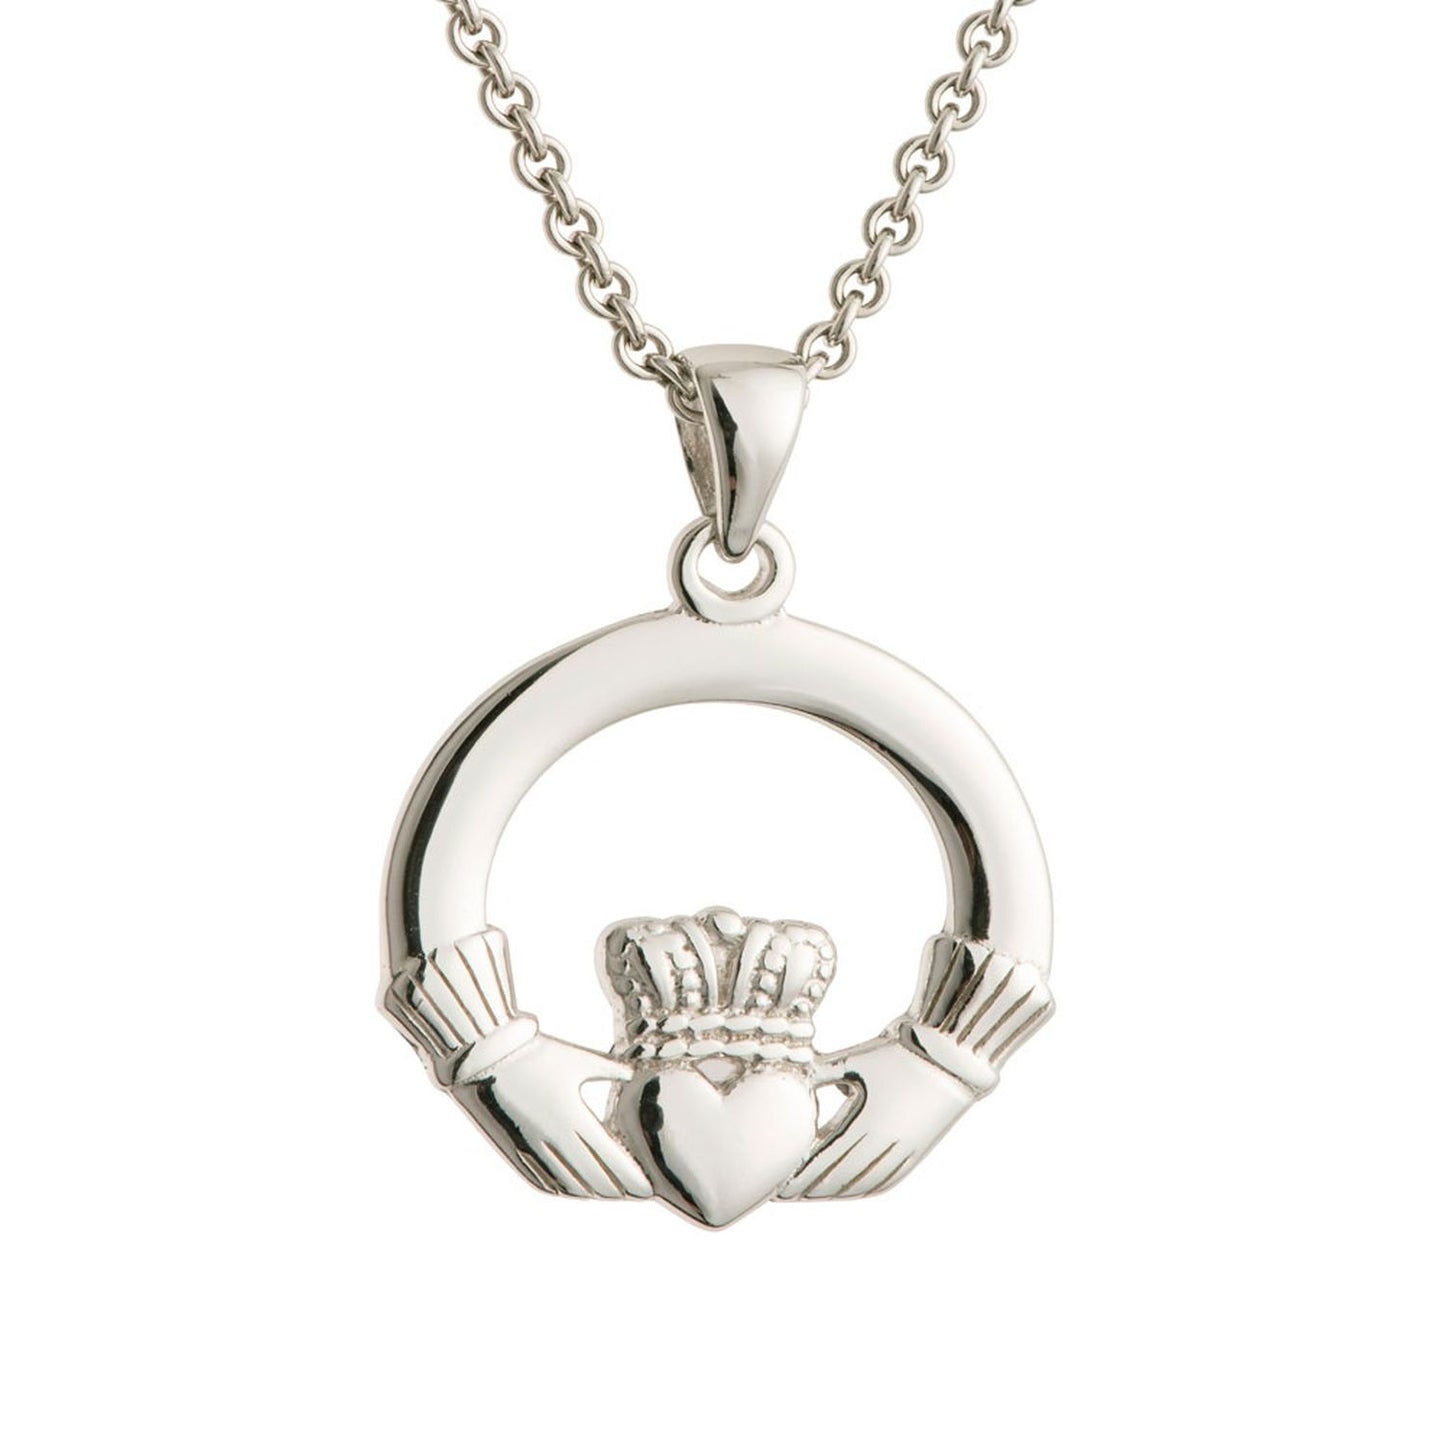 Galway Rhodium Plated 925 Sterling Silver Claddagh Pendant (1.58 Gms) and Chain